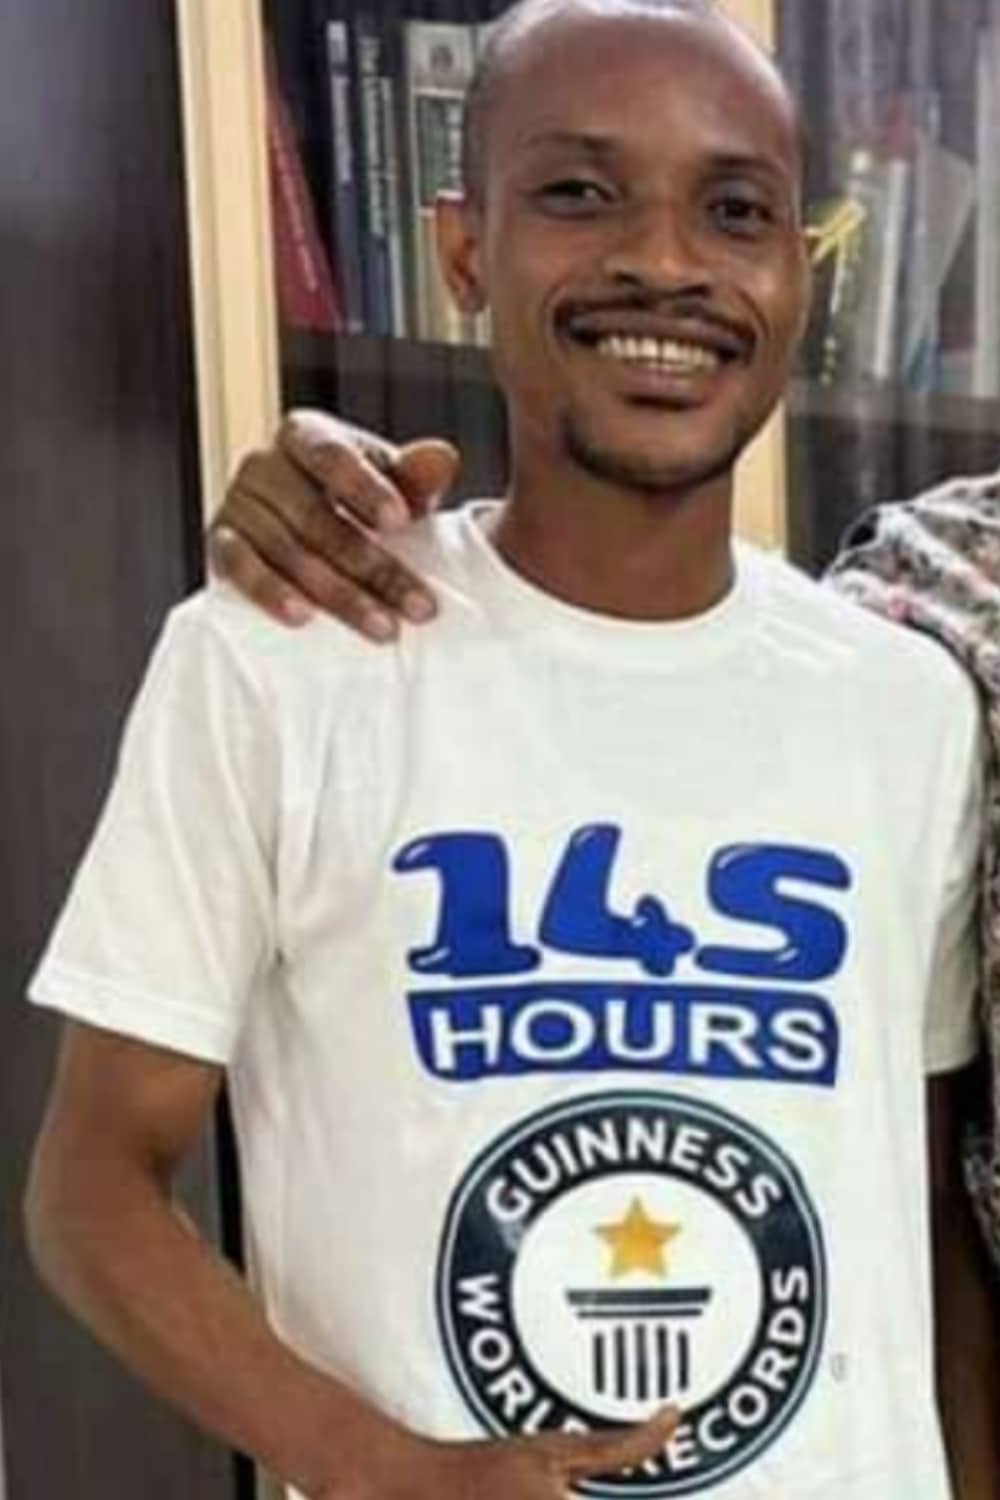 "Book-a-thon" - Nigerian man gets approval, set to read for 145 hours straight to break Guinness World Record